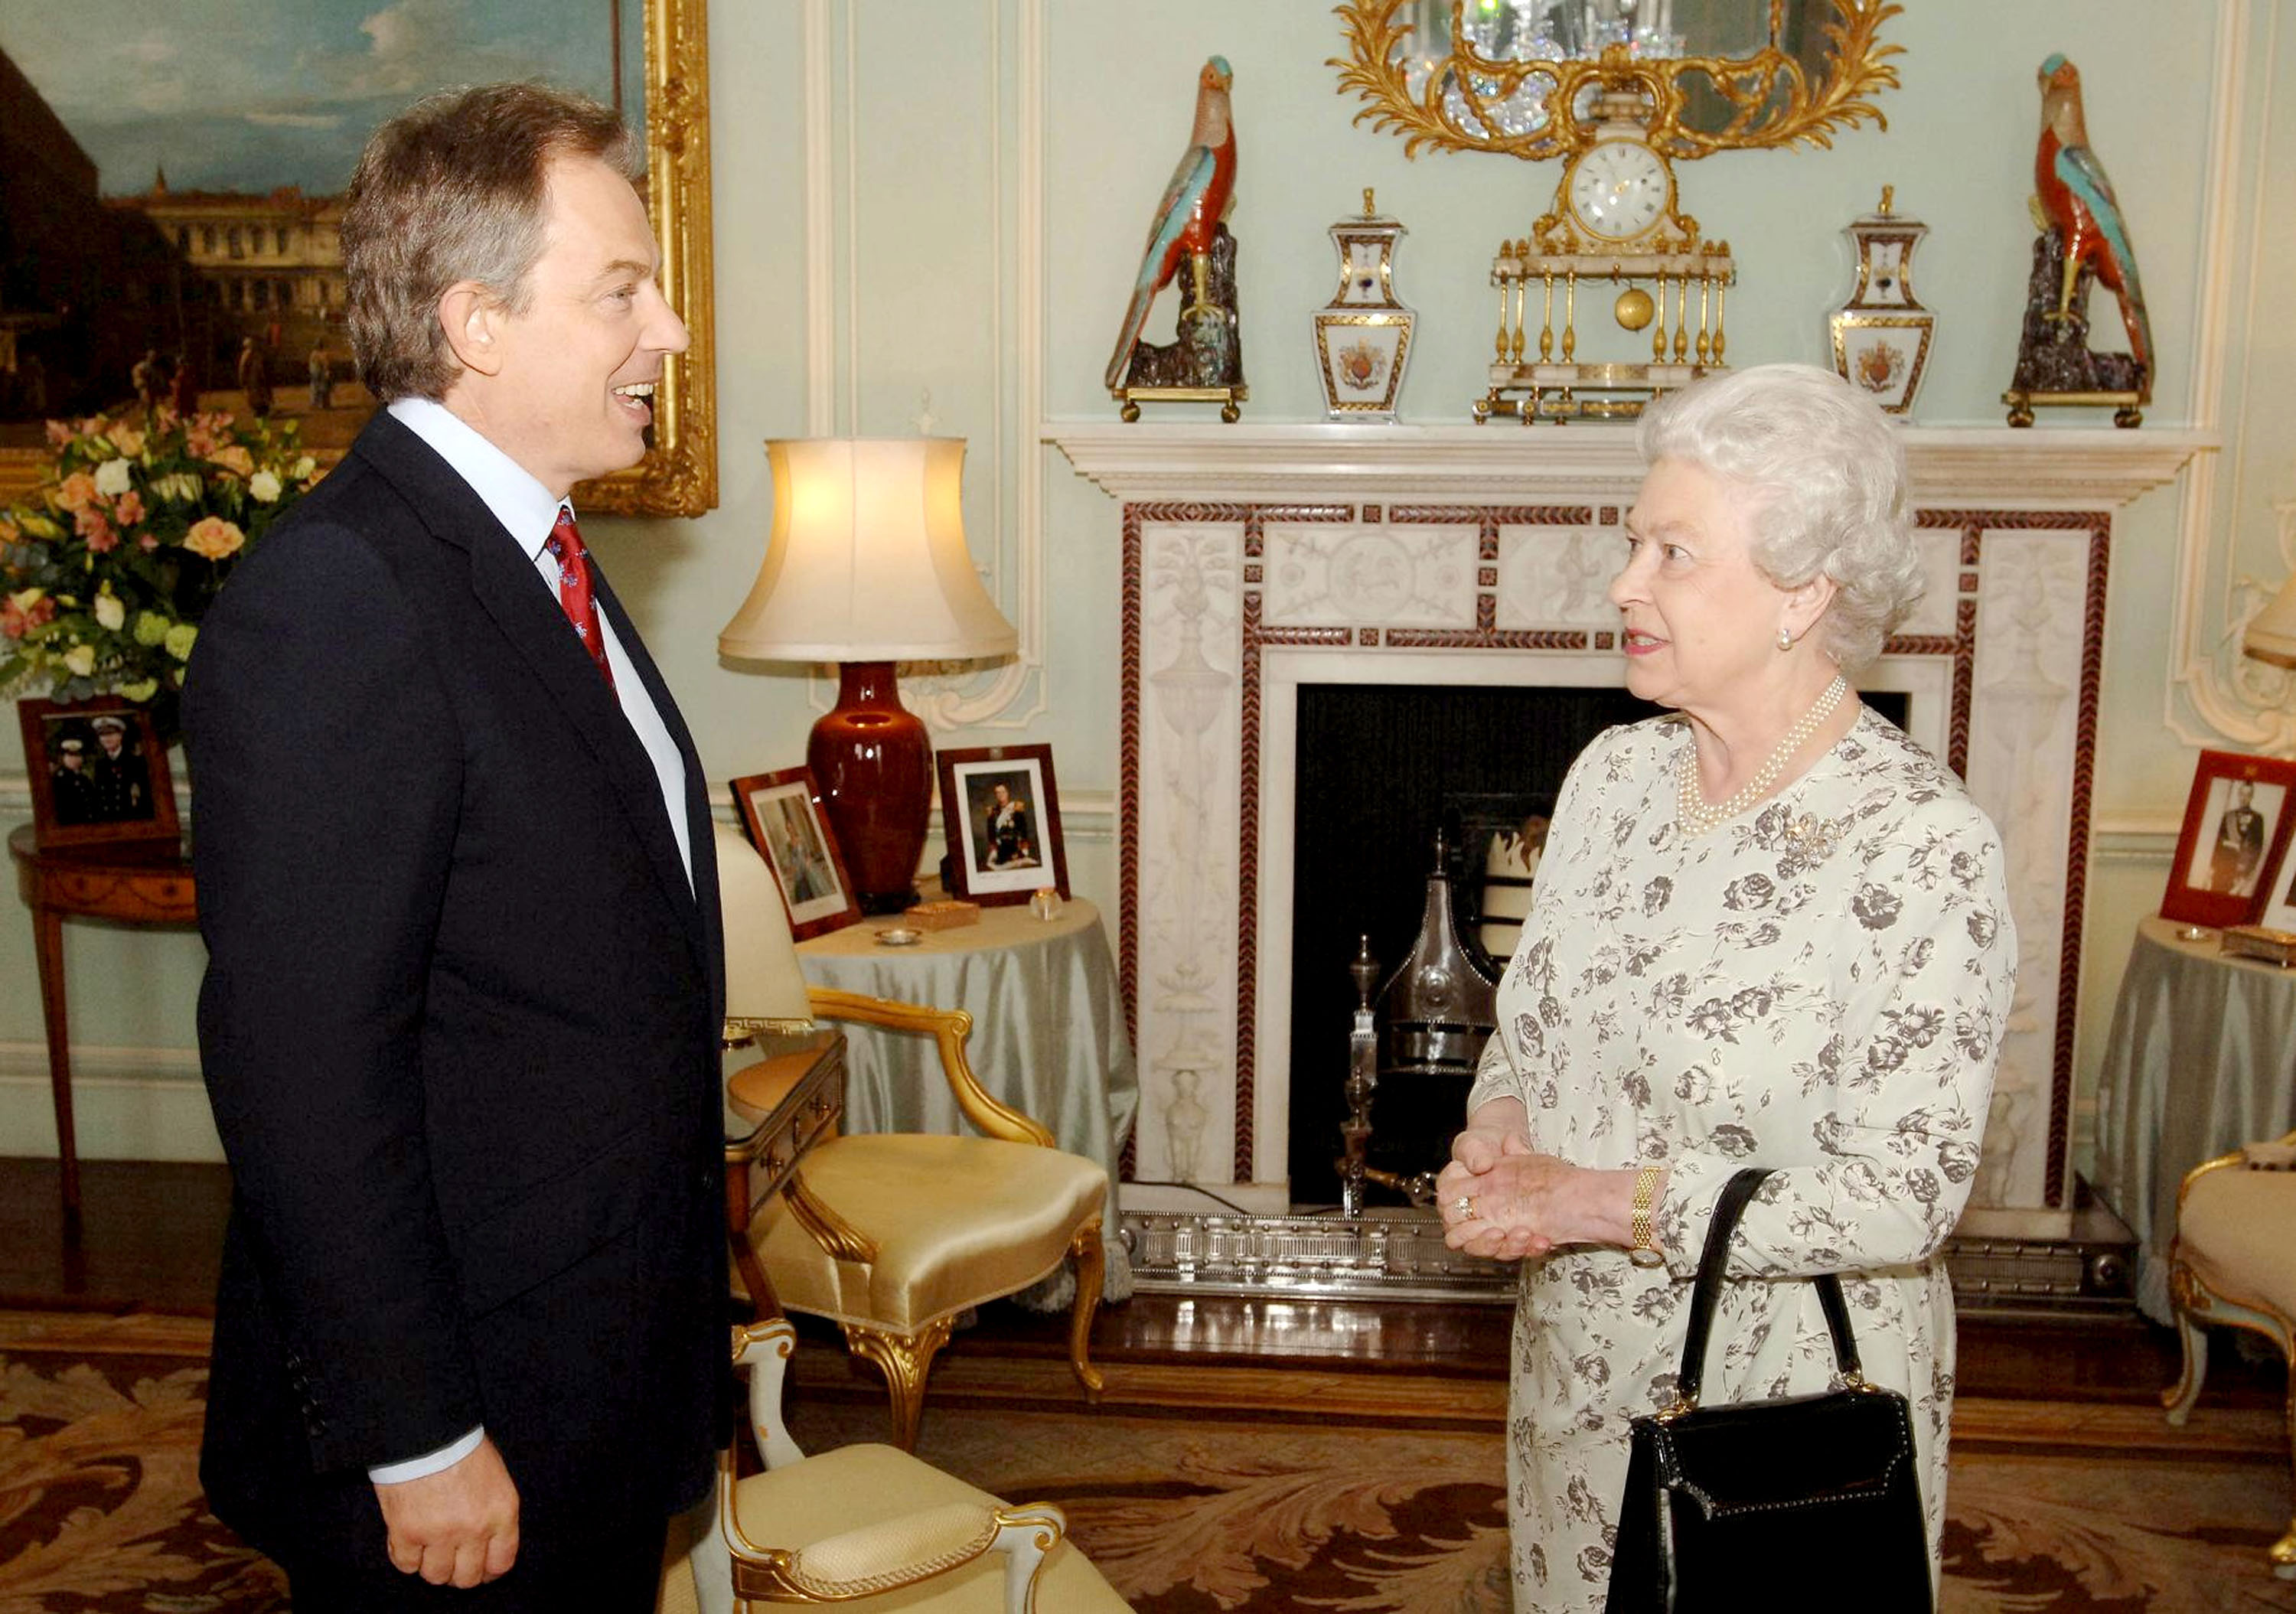 The Queen receives then-Prime Minister Tony Blair  2005, at Buckingham Palace after the Labour Party won a historic third term in office - but with a reduced majority. (Photo by Anwar Hussein Collection/ROTA/WireImage)